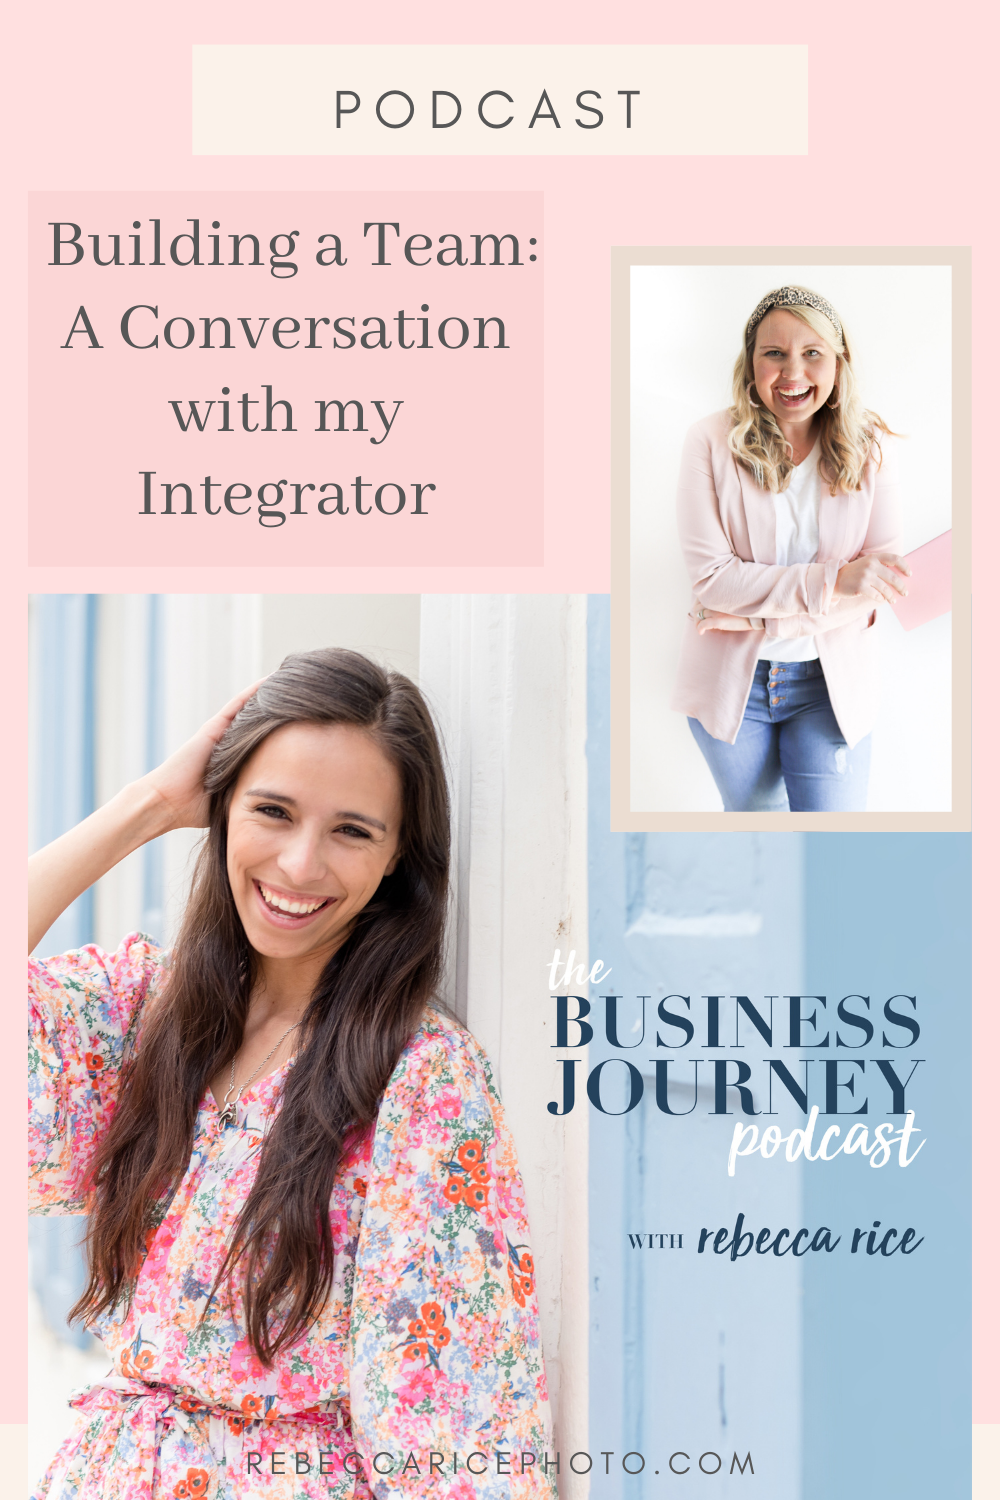 Conversation with my Integrator, Kat Schmoyer: tips for building a team shared on the Business Journey Podcast with Rebecca Rice